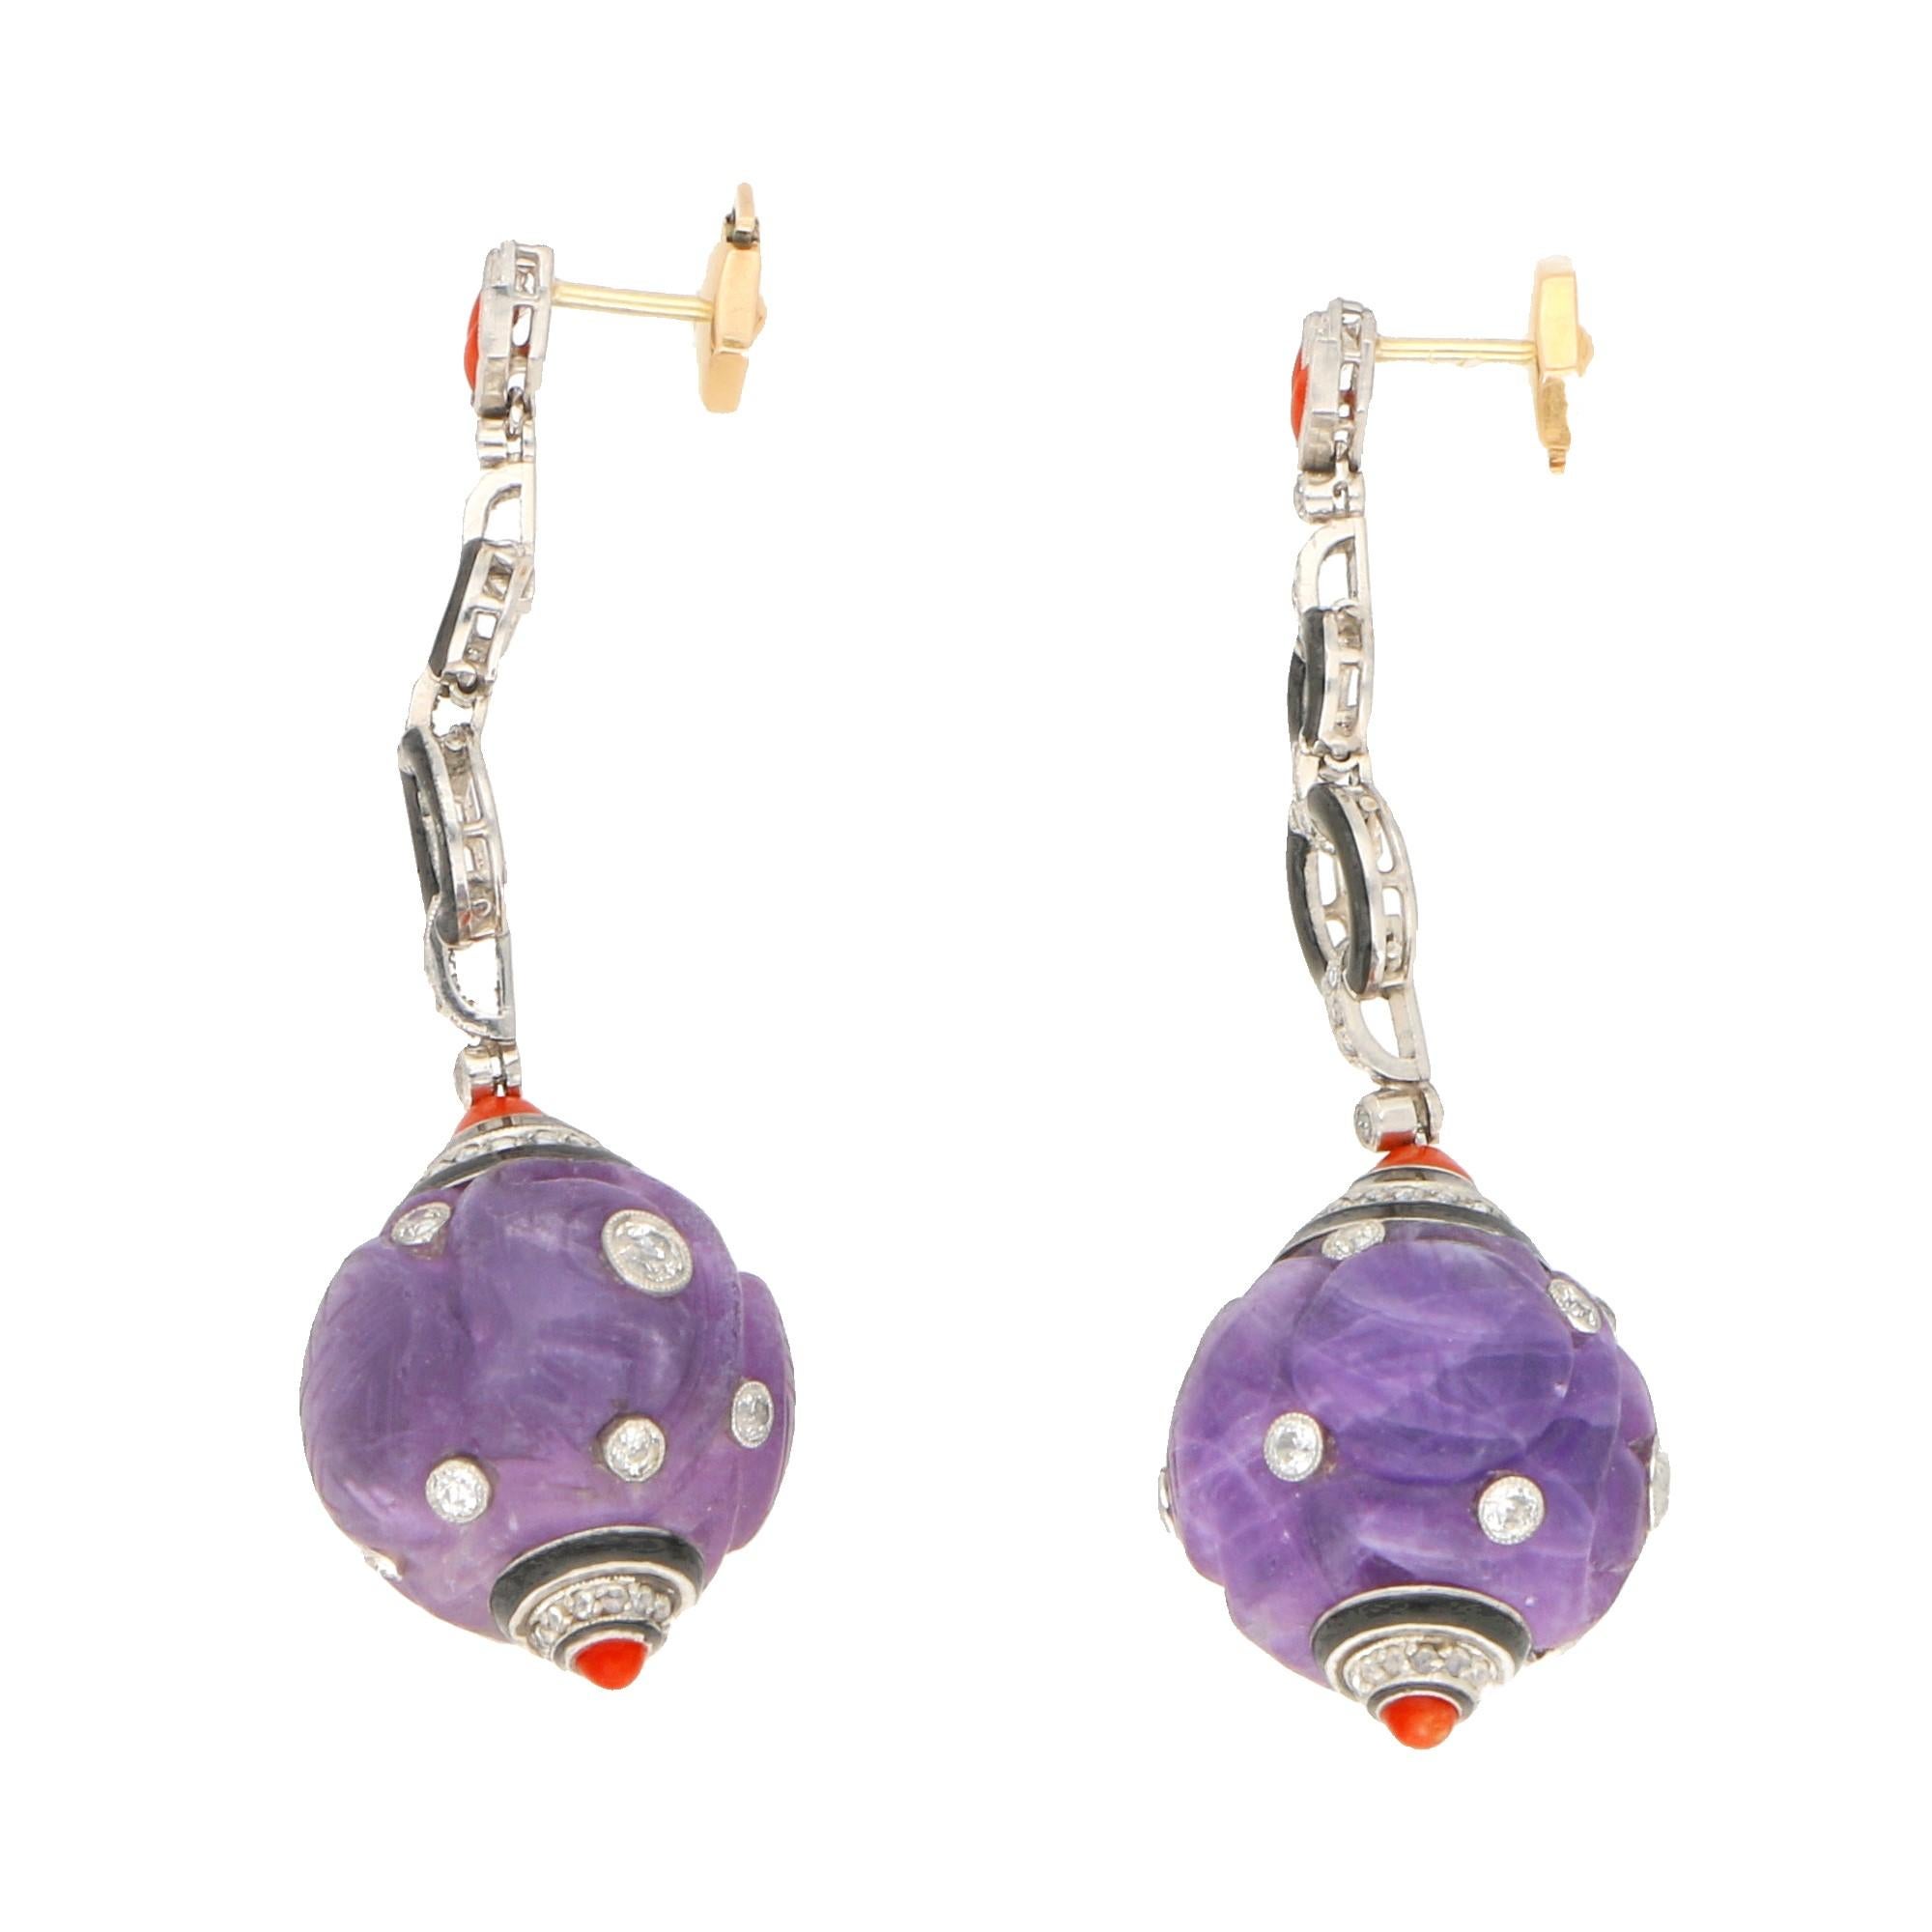 A fine pair of Art Deco amethyst, diamond, coral and enamel drop earrings in platinum, French, circa 1930. Each earring featuring a carved boule amethyst encrusted with twelve millegrain-set Old European brilliant-cut and Transitional round